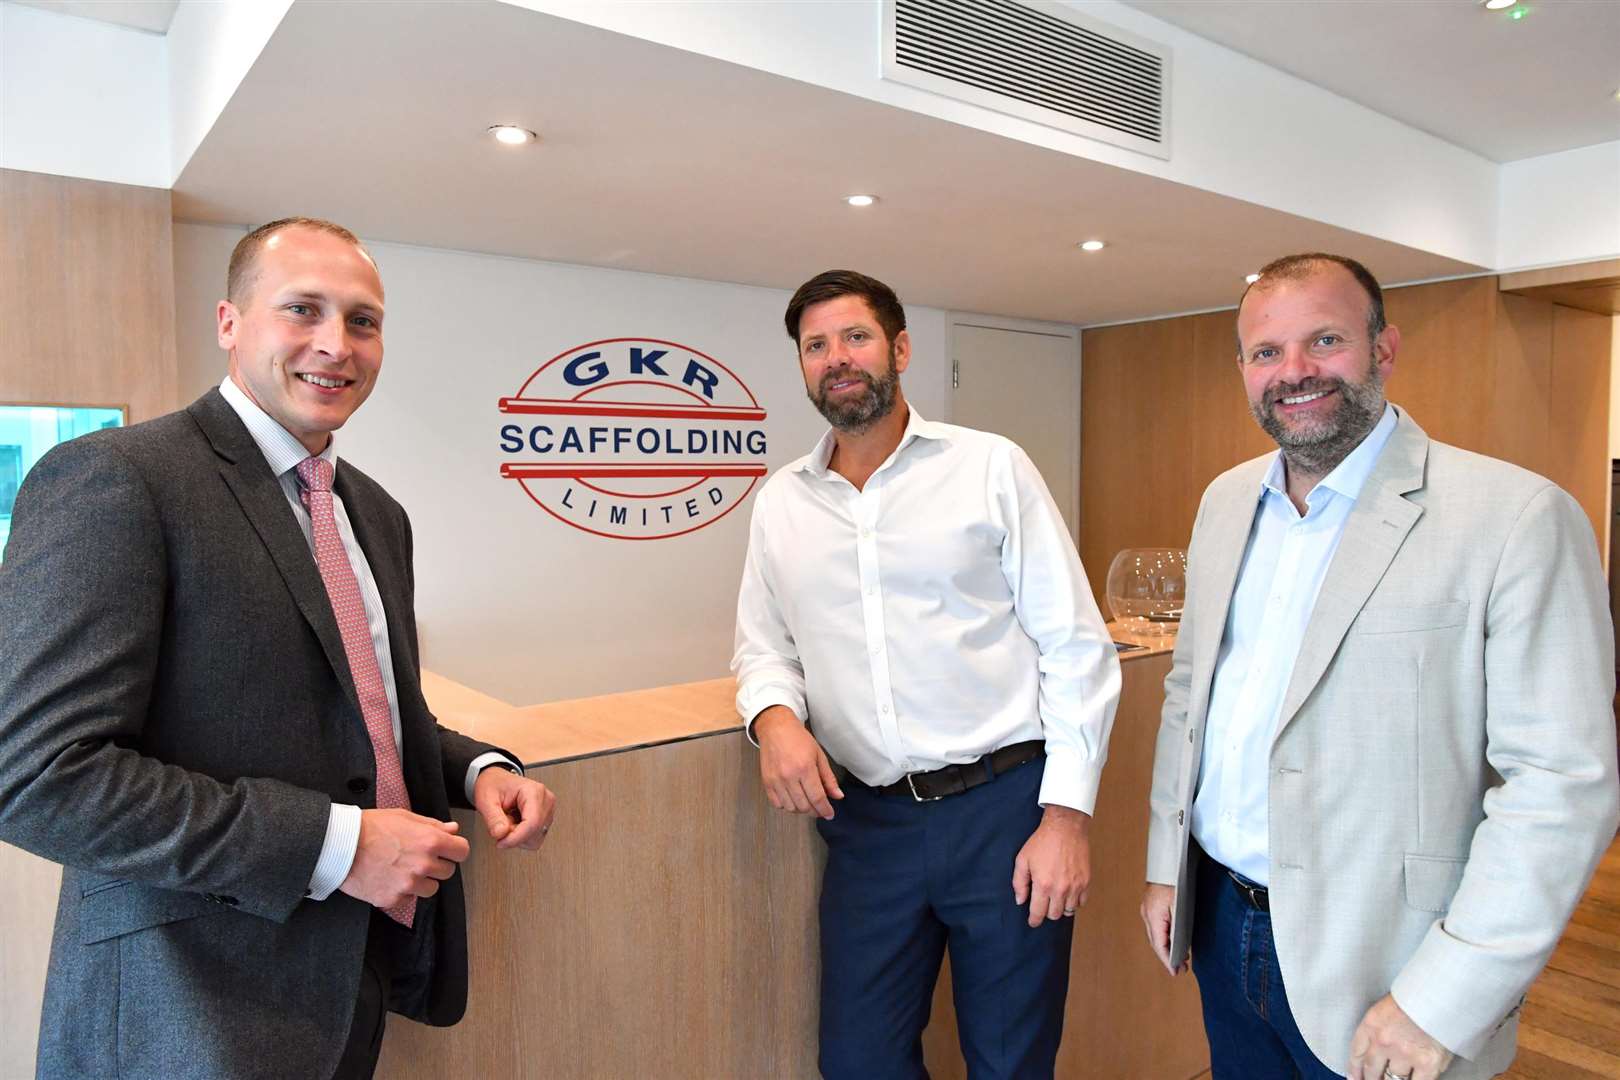 Barclays relationship director Andrew Burton with directors of GKR Scaffolding Neil and Lee Rowswell at their new offices on Tower Bridge Road, London (4444114)